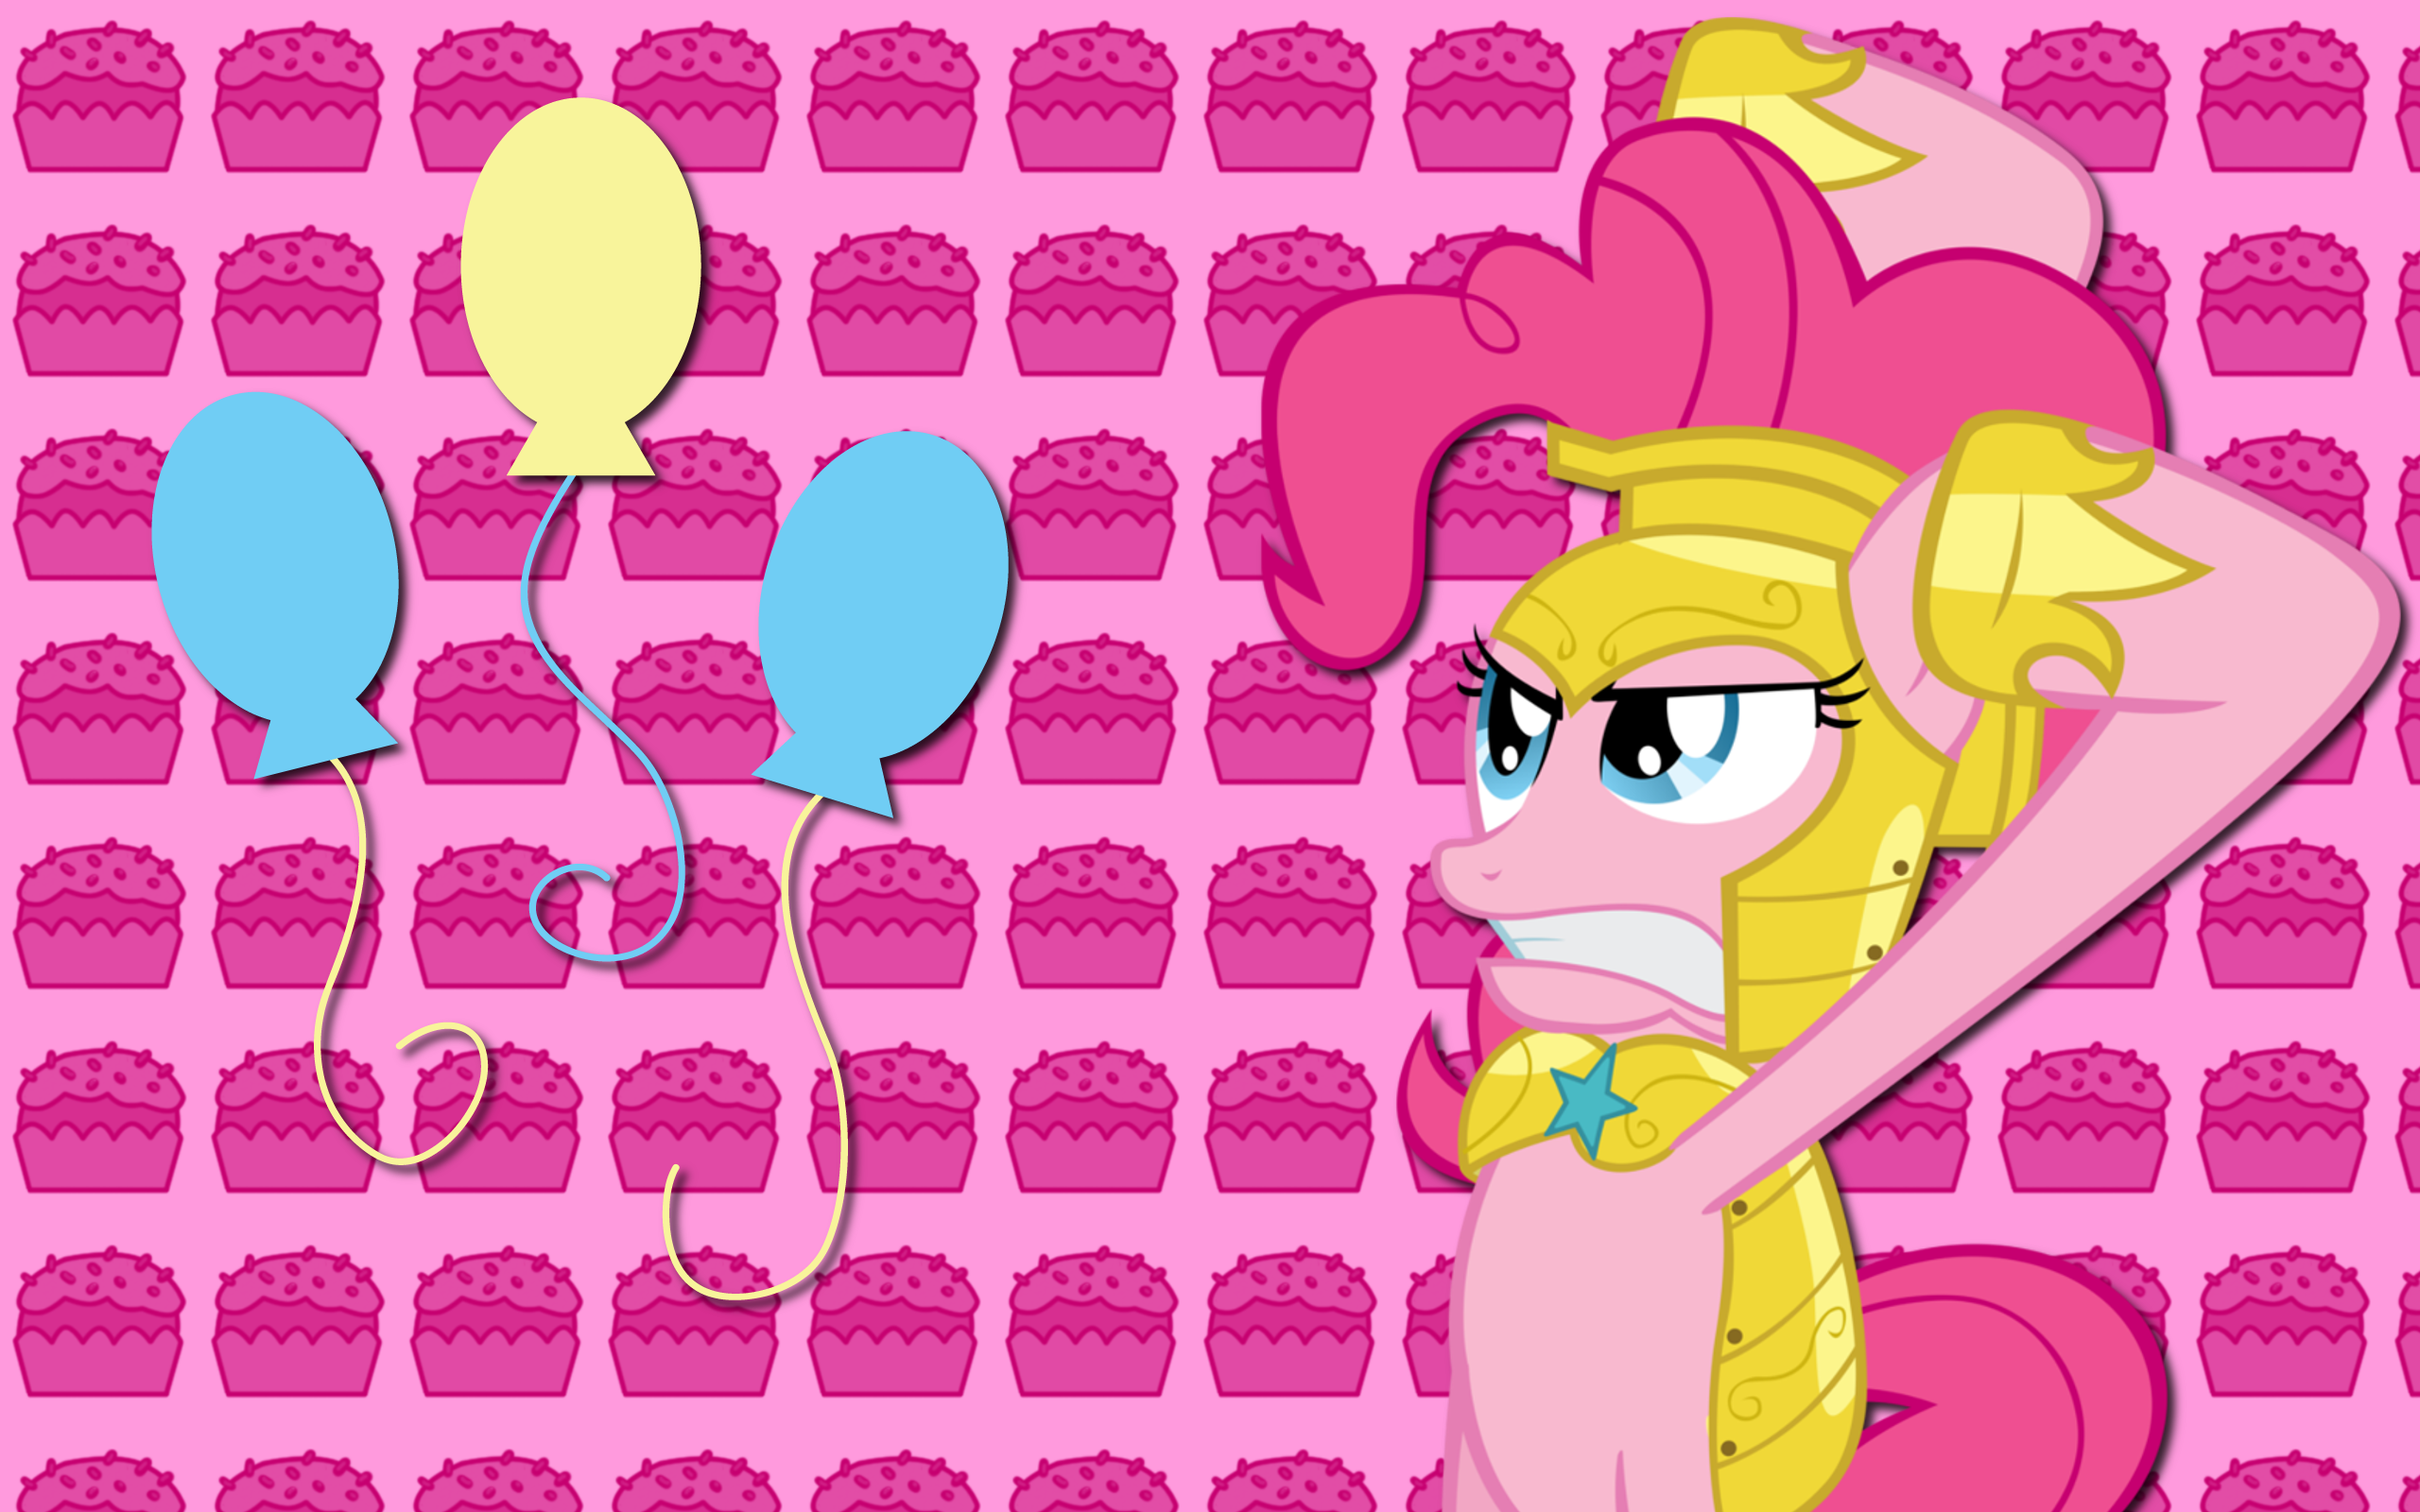 Guard Pinkie WP by AliceHumanSacrifice0, ooklah and Spaceponies